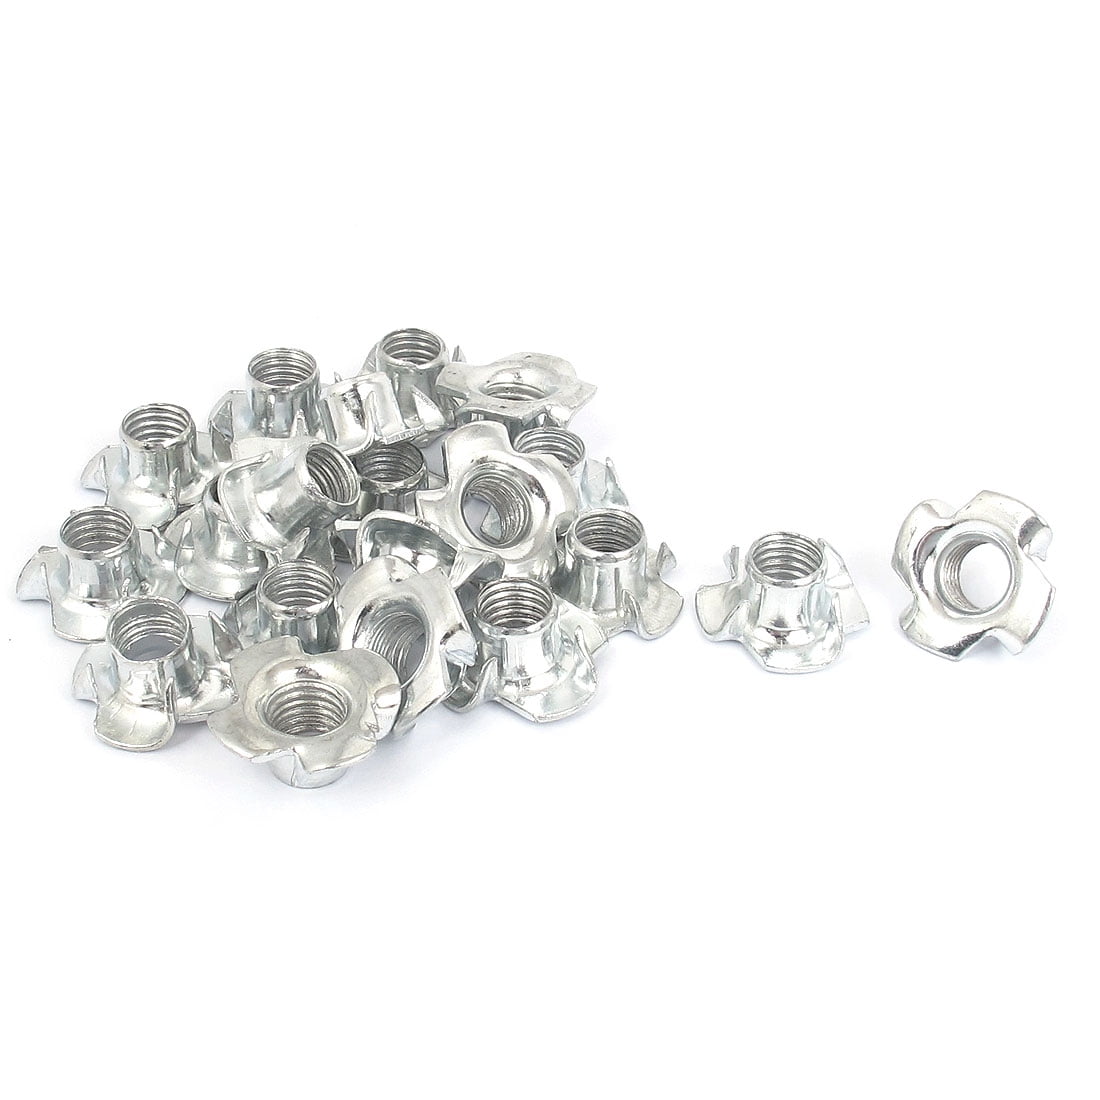 25 T-Nut Tee Nuts 1/4"-20 6-Prong  Low Carbon Steel 